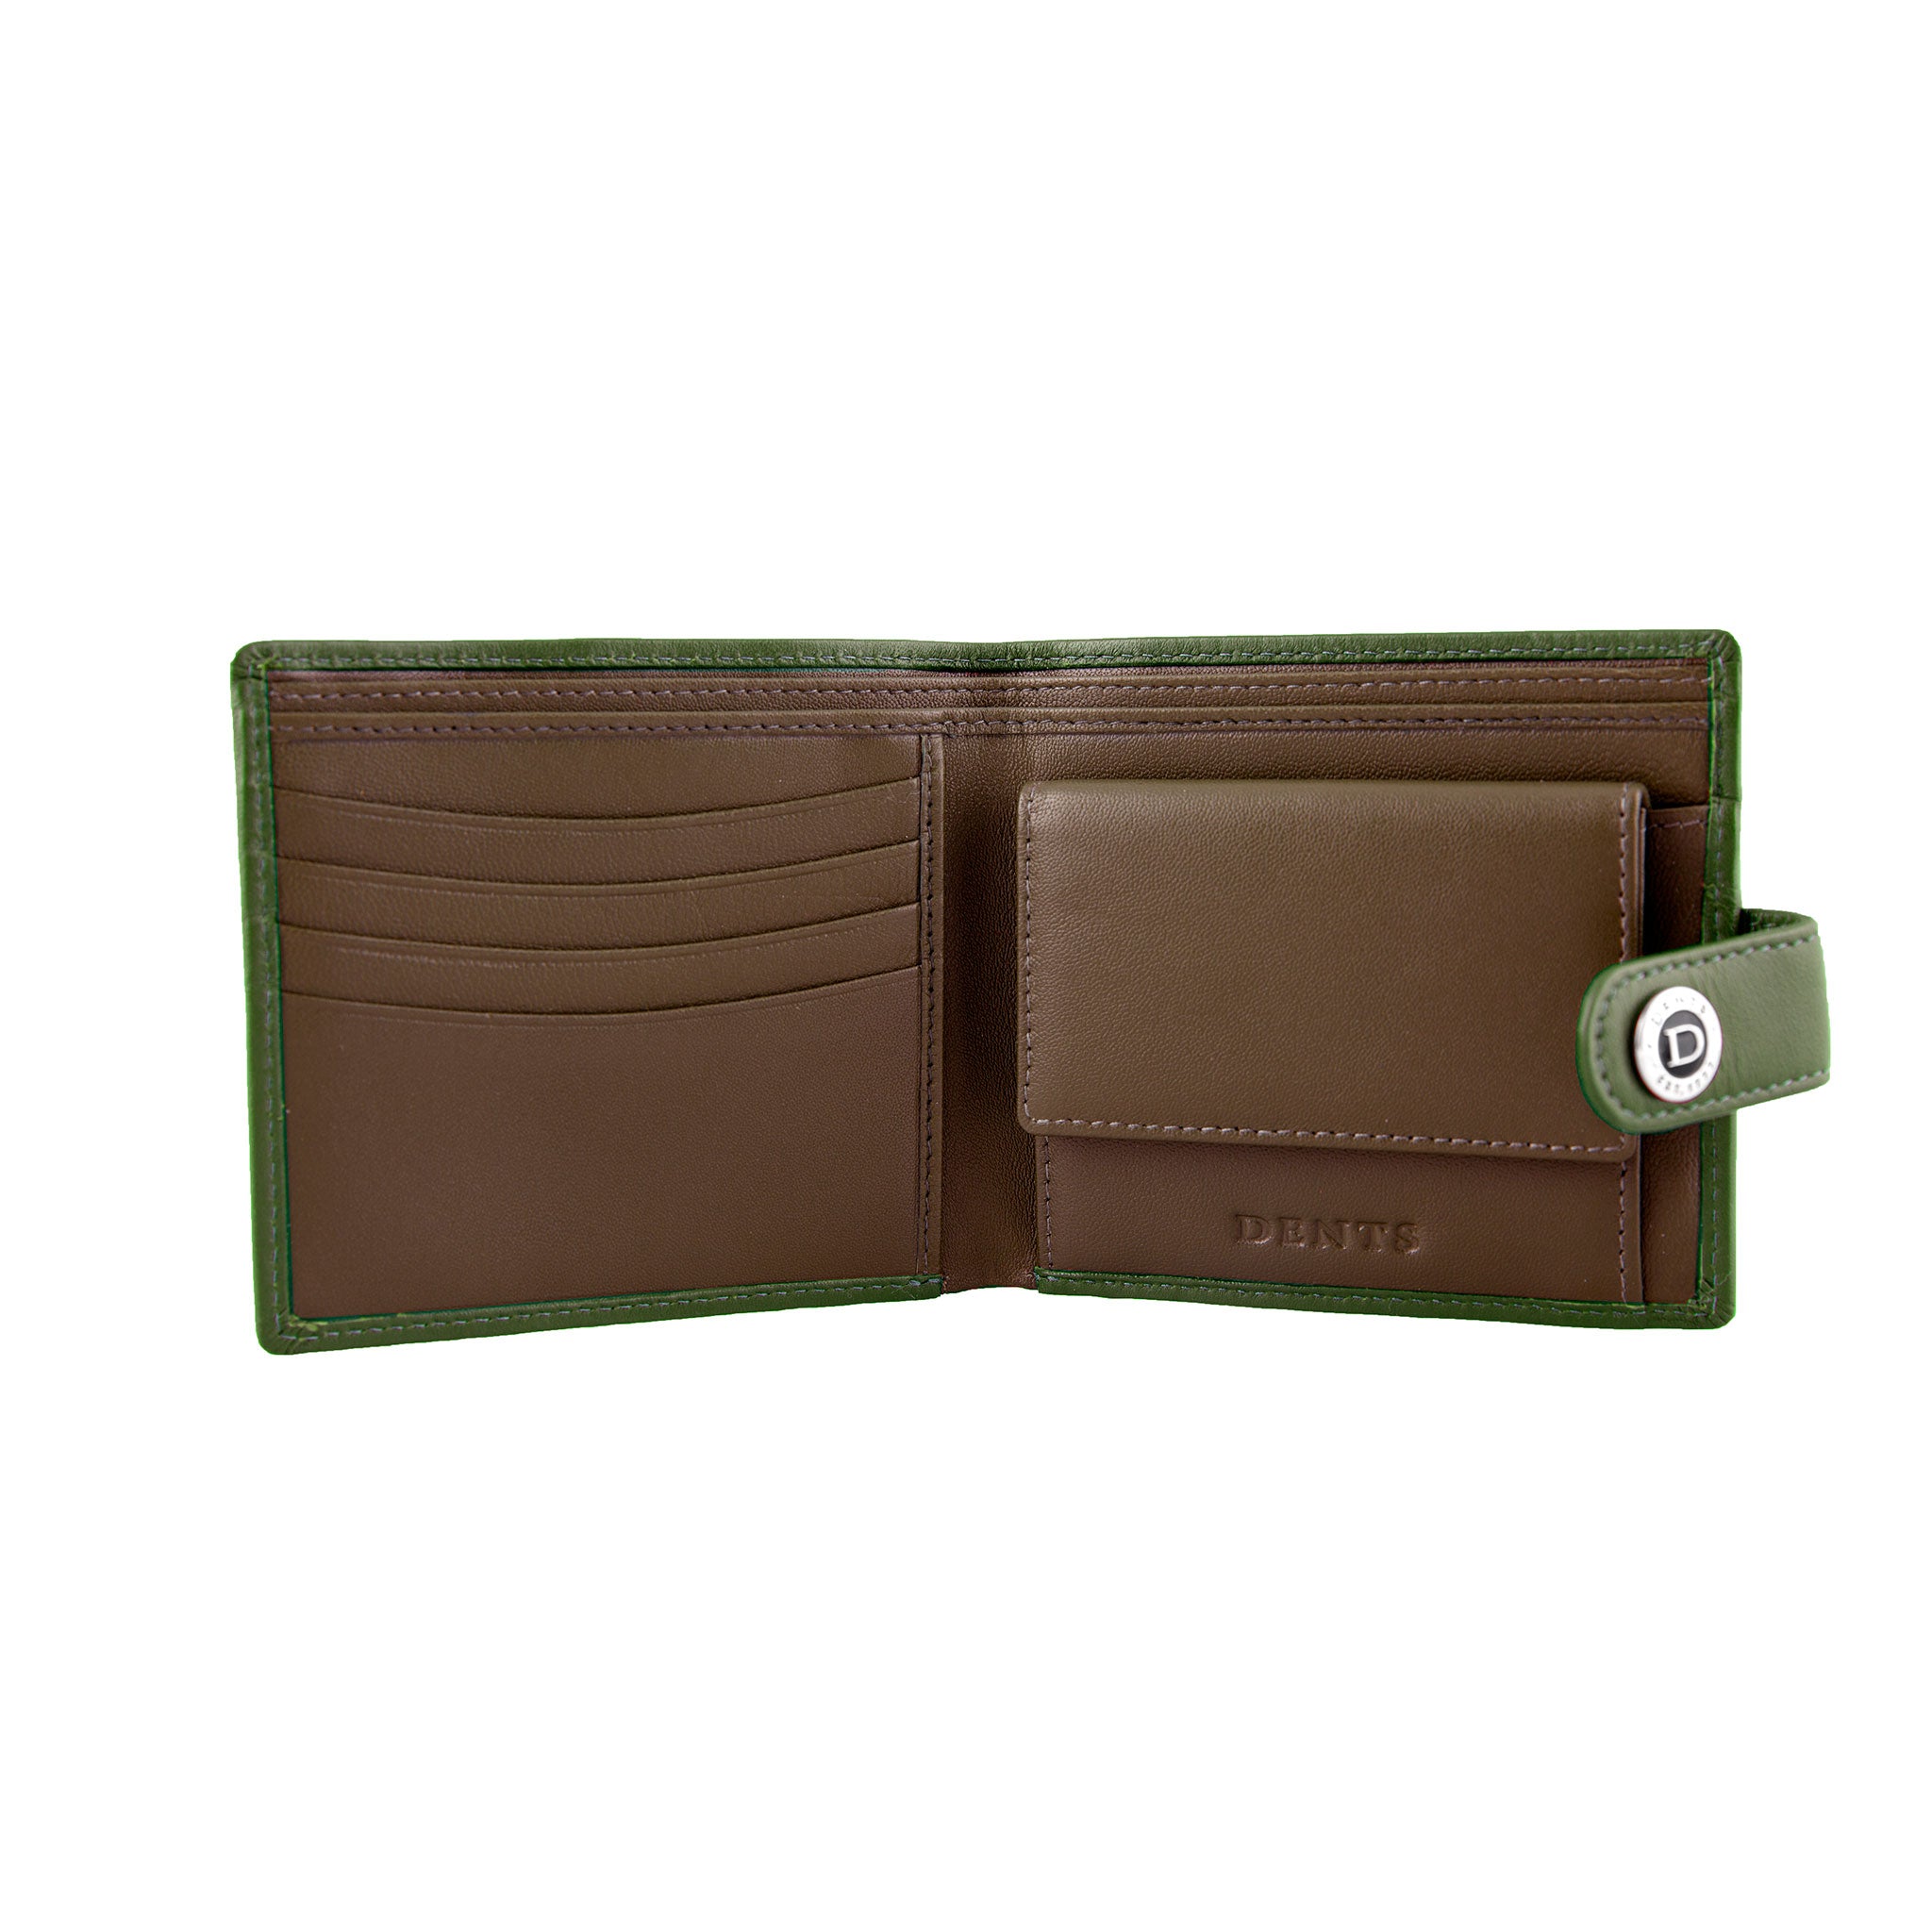 WOODLAND Brcp-St02 Brown Leather Wallet For Men'S in Delhi at best price by  Aman Store - Justdial